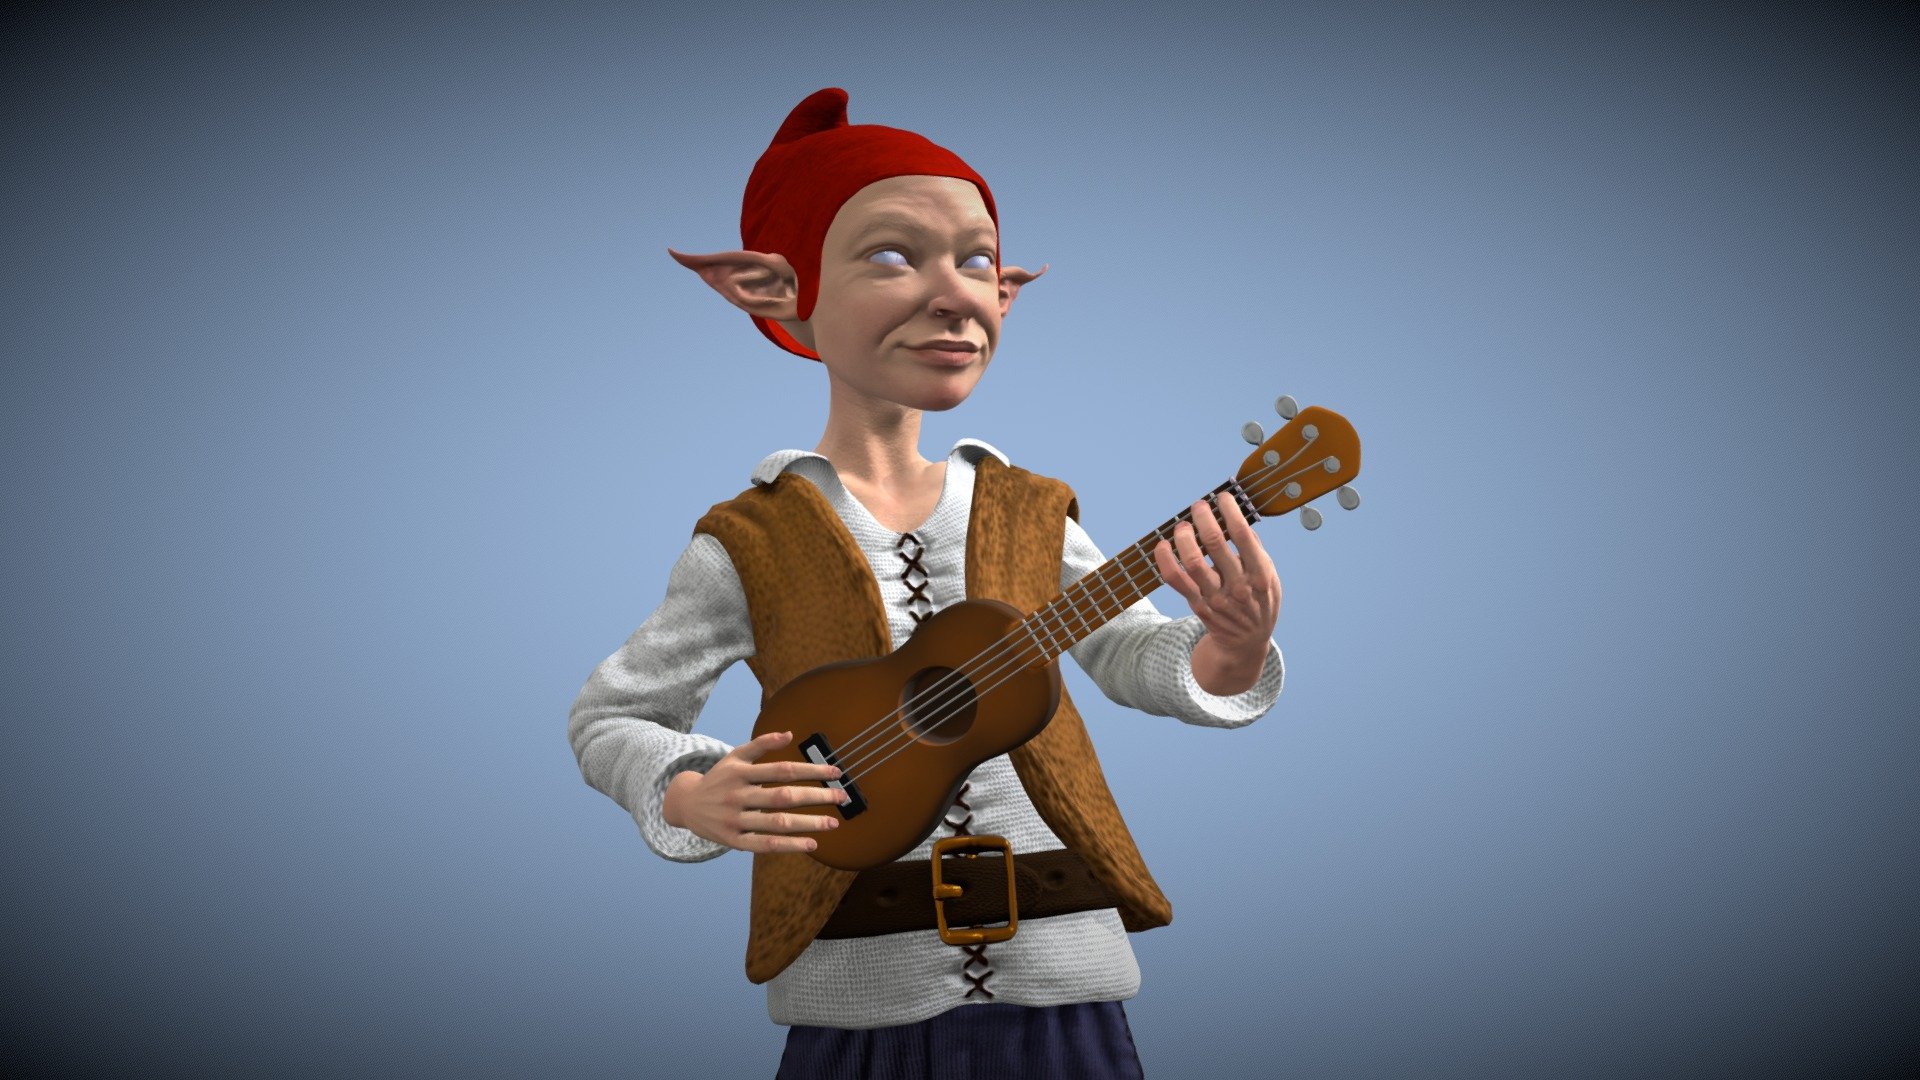 A hobbity, gnomy little guy that enjoys seducing fairies. His method? The pleasant sound of a ukelele coupled with a splendid singing voice. If that doesn't work, he also has an Iroc Z-28 3d model